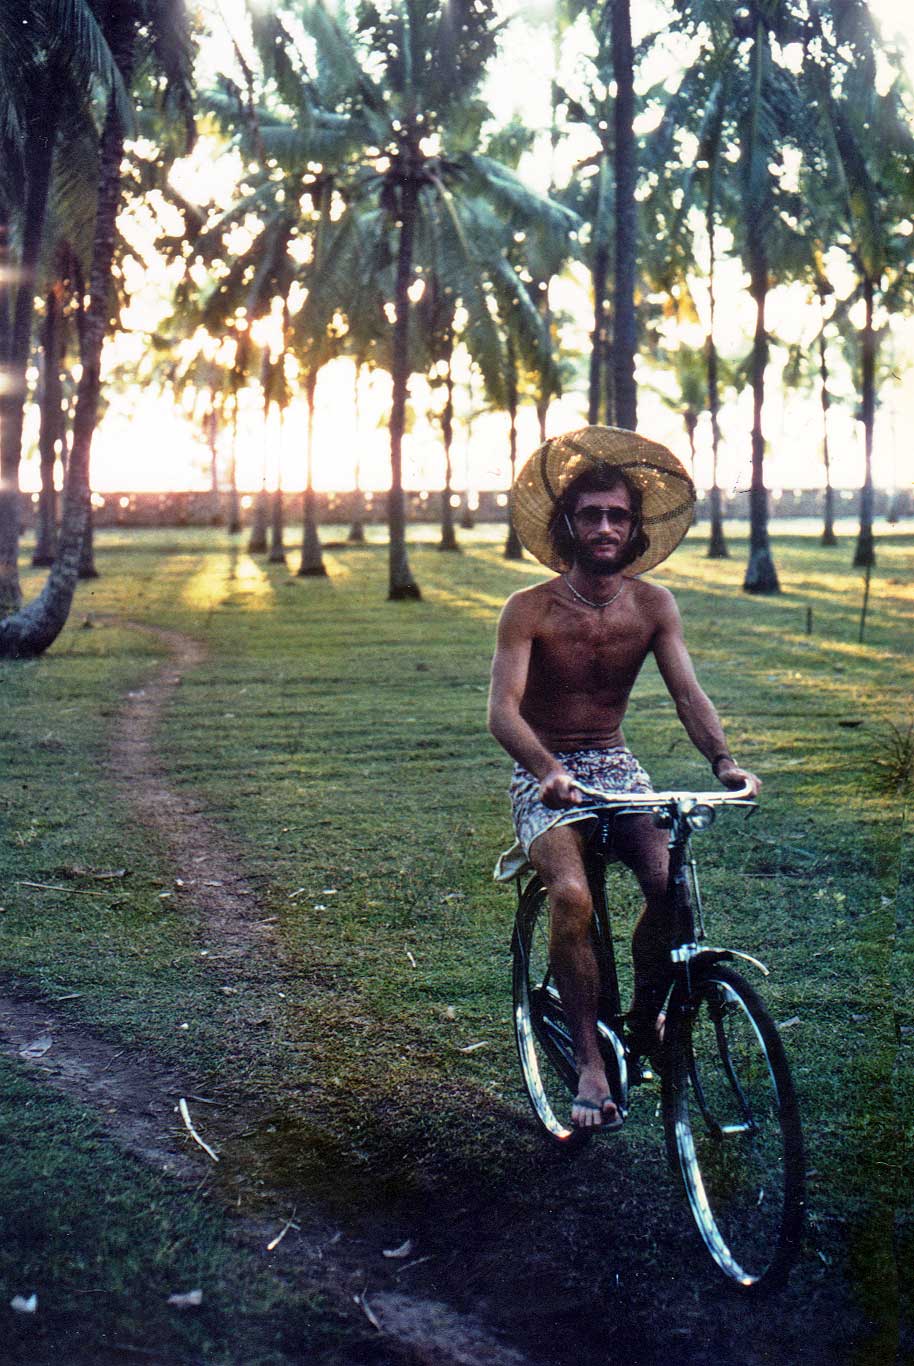 Peter riding a bike through the coconut trees on the beachfront in Kuta in the 70s